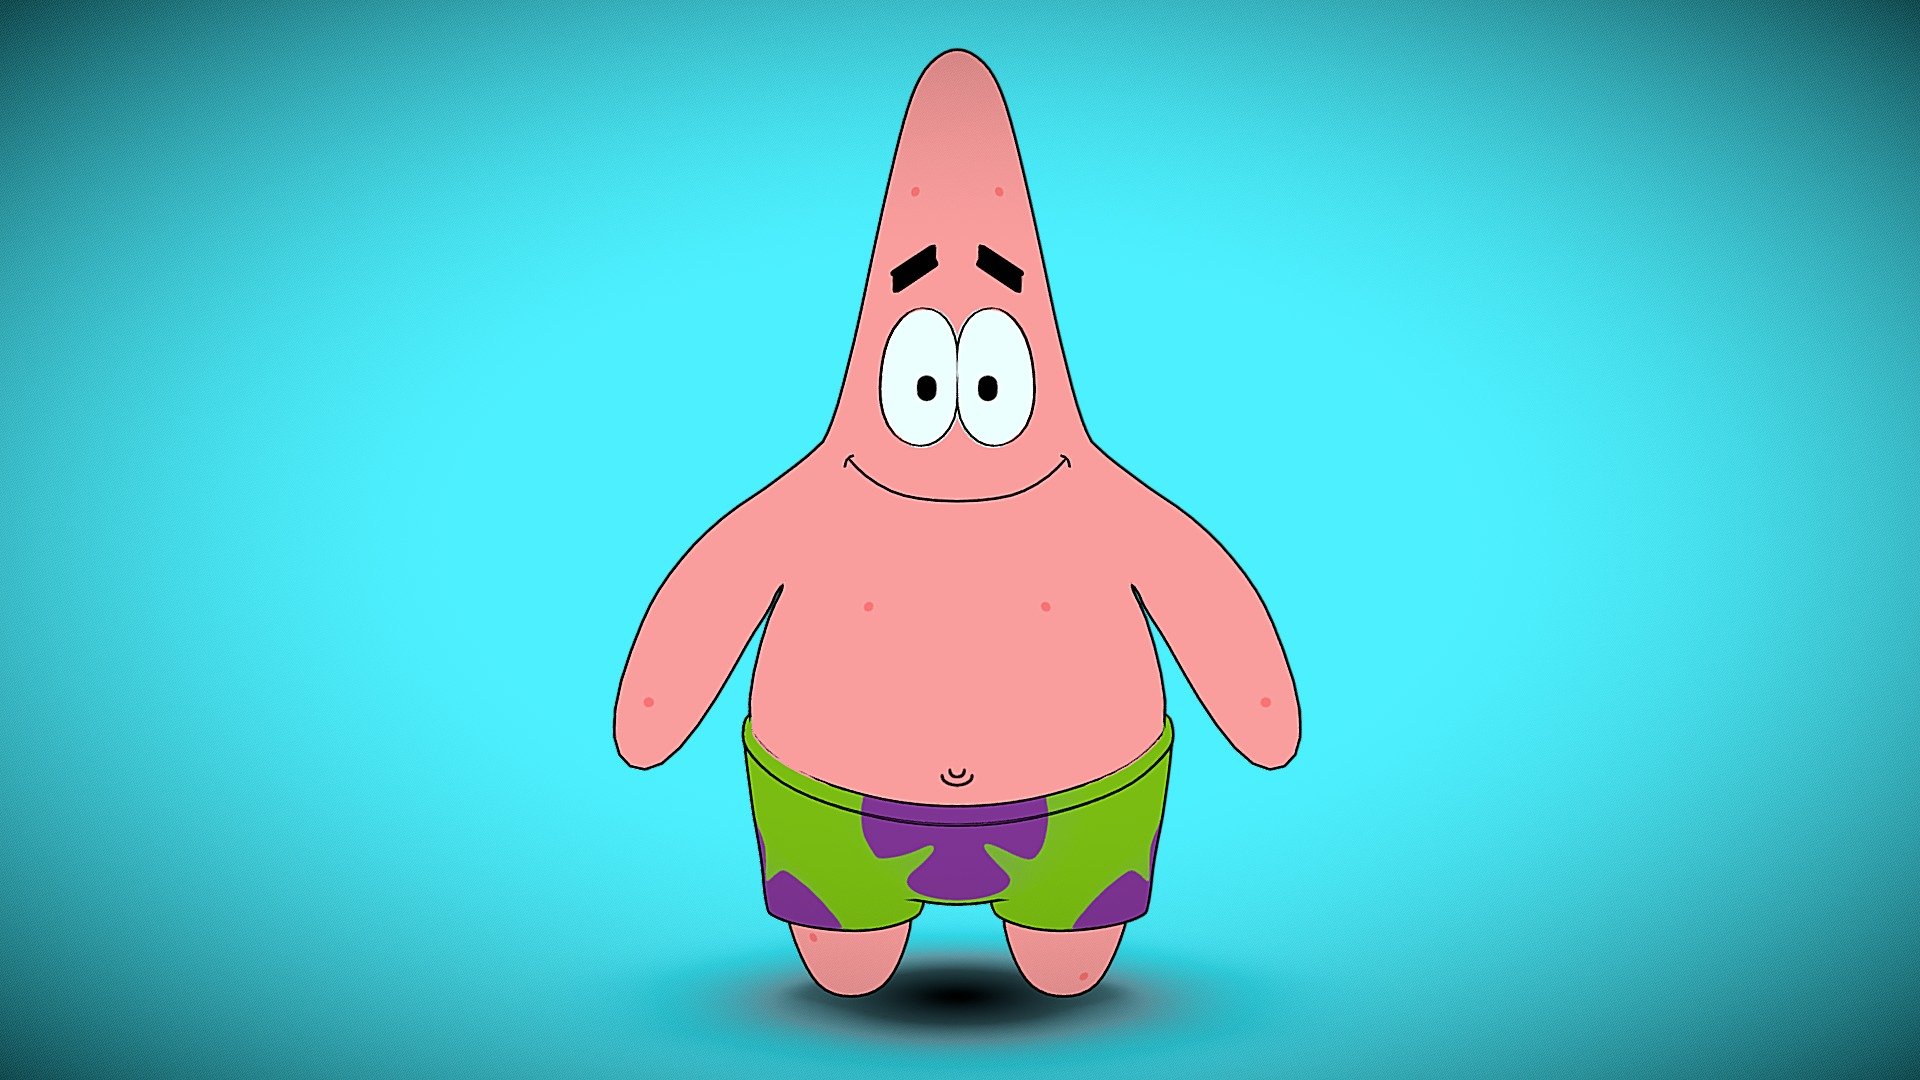 I made patrick star of the spongebob series applied a cardboard effect, this is the first result I achieved using this effect.

The model with the effect simulates a dimension in 2d - Patrick Star Toon - Buy Royalty Free 3D model by Takiri Cube (@TakiriCube) 3d model